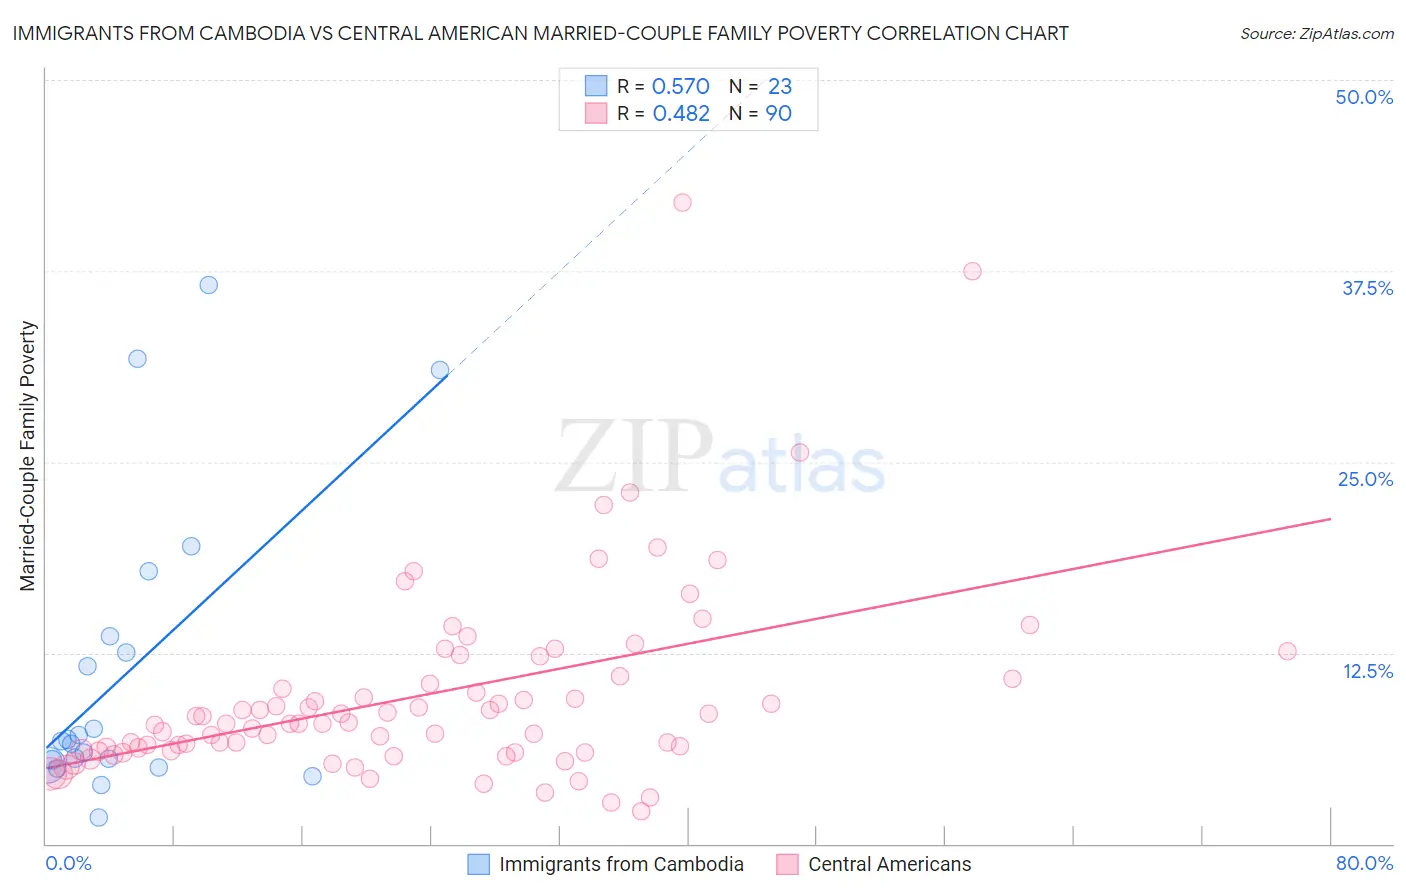 Immigrants from Cambodia vs Central American Married-Couple Family Poverty